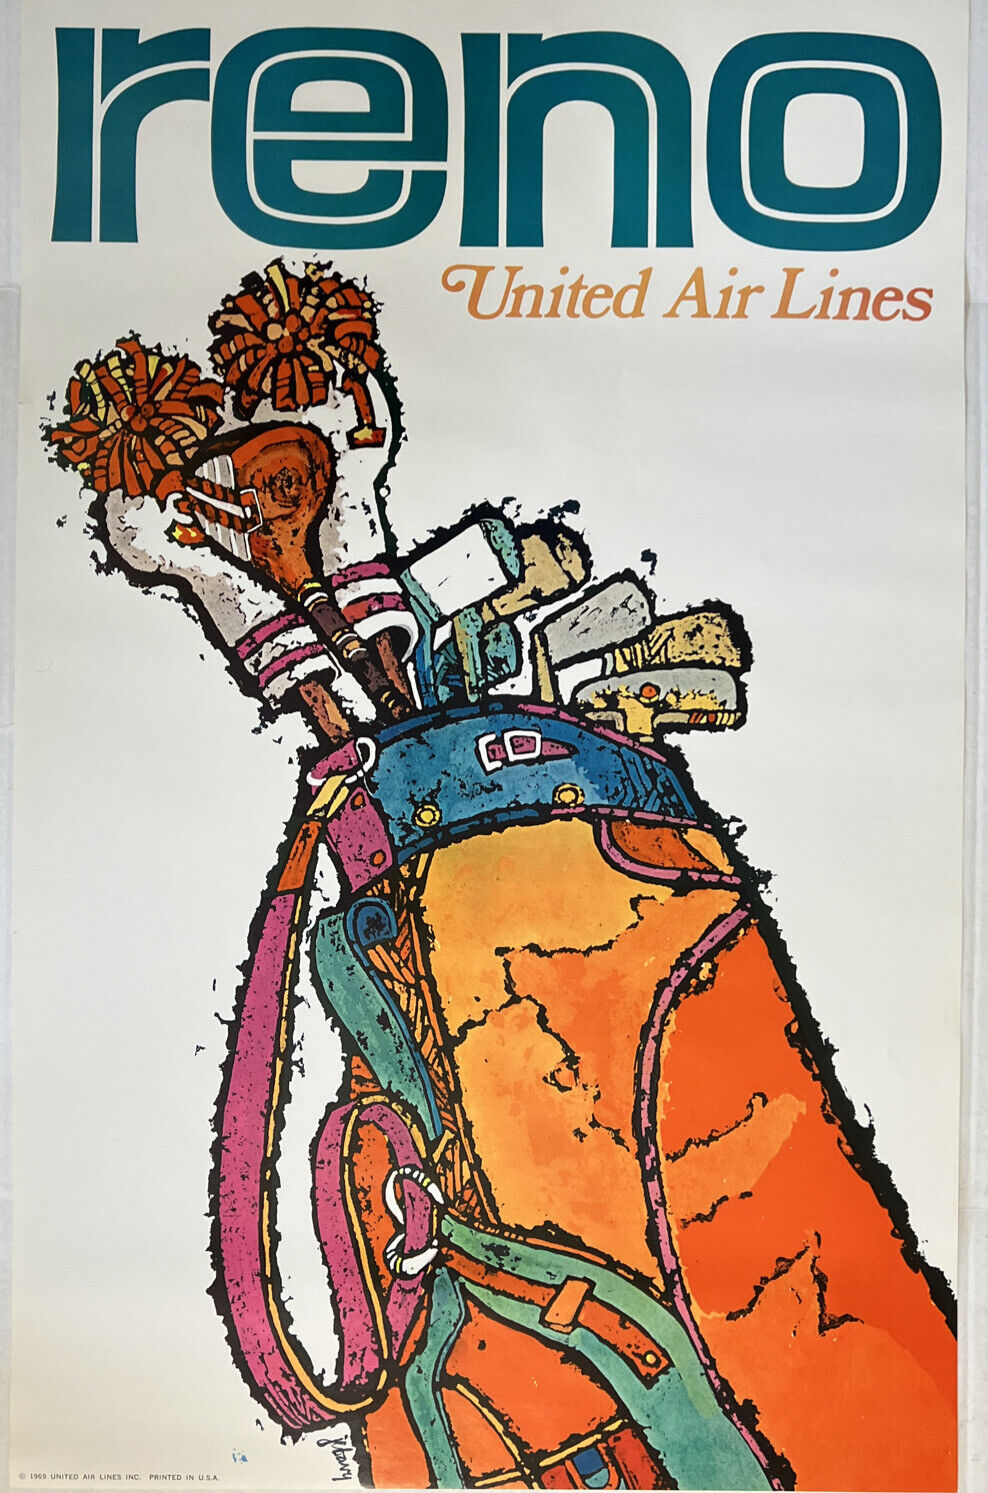 Vintage Reno 1969 United Airlines Promotional Travel Poster - New -